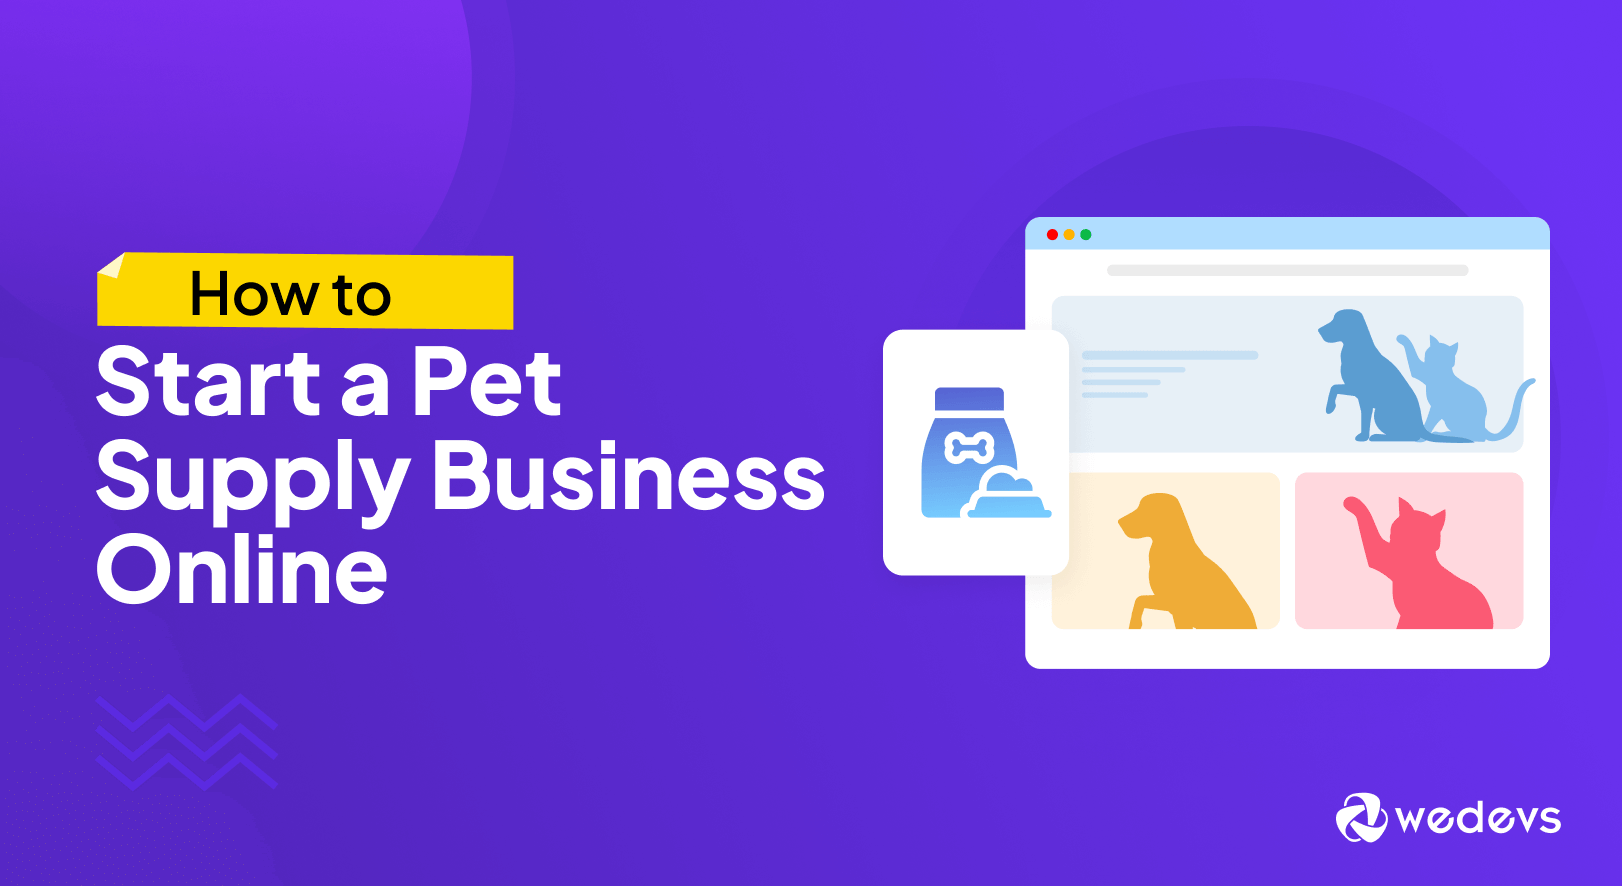 How to Start a Pet Supply Business Online